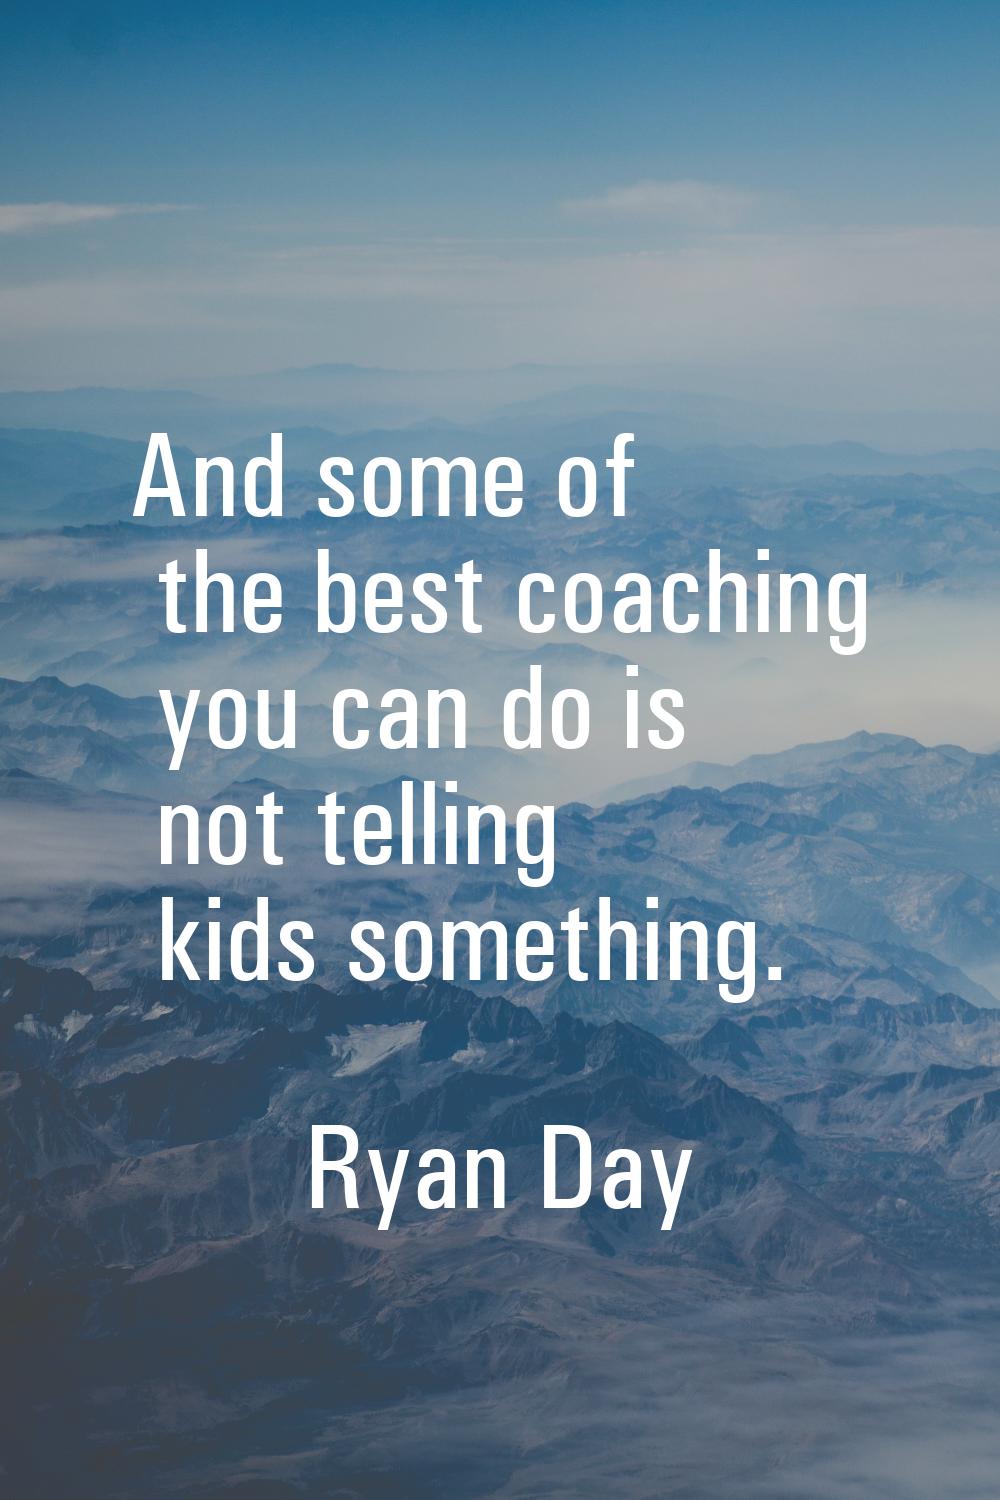 And some of the best coaching you can do is not telling kids something.